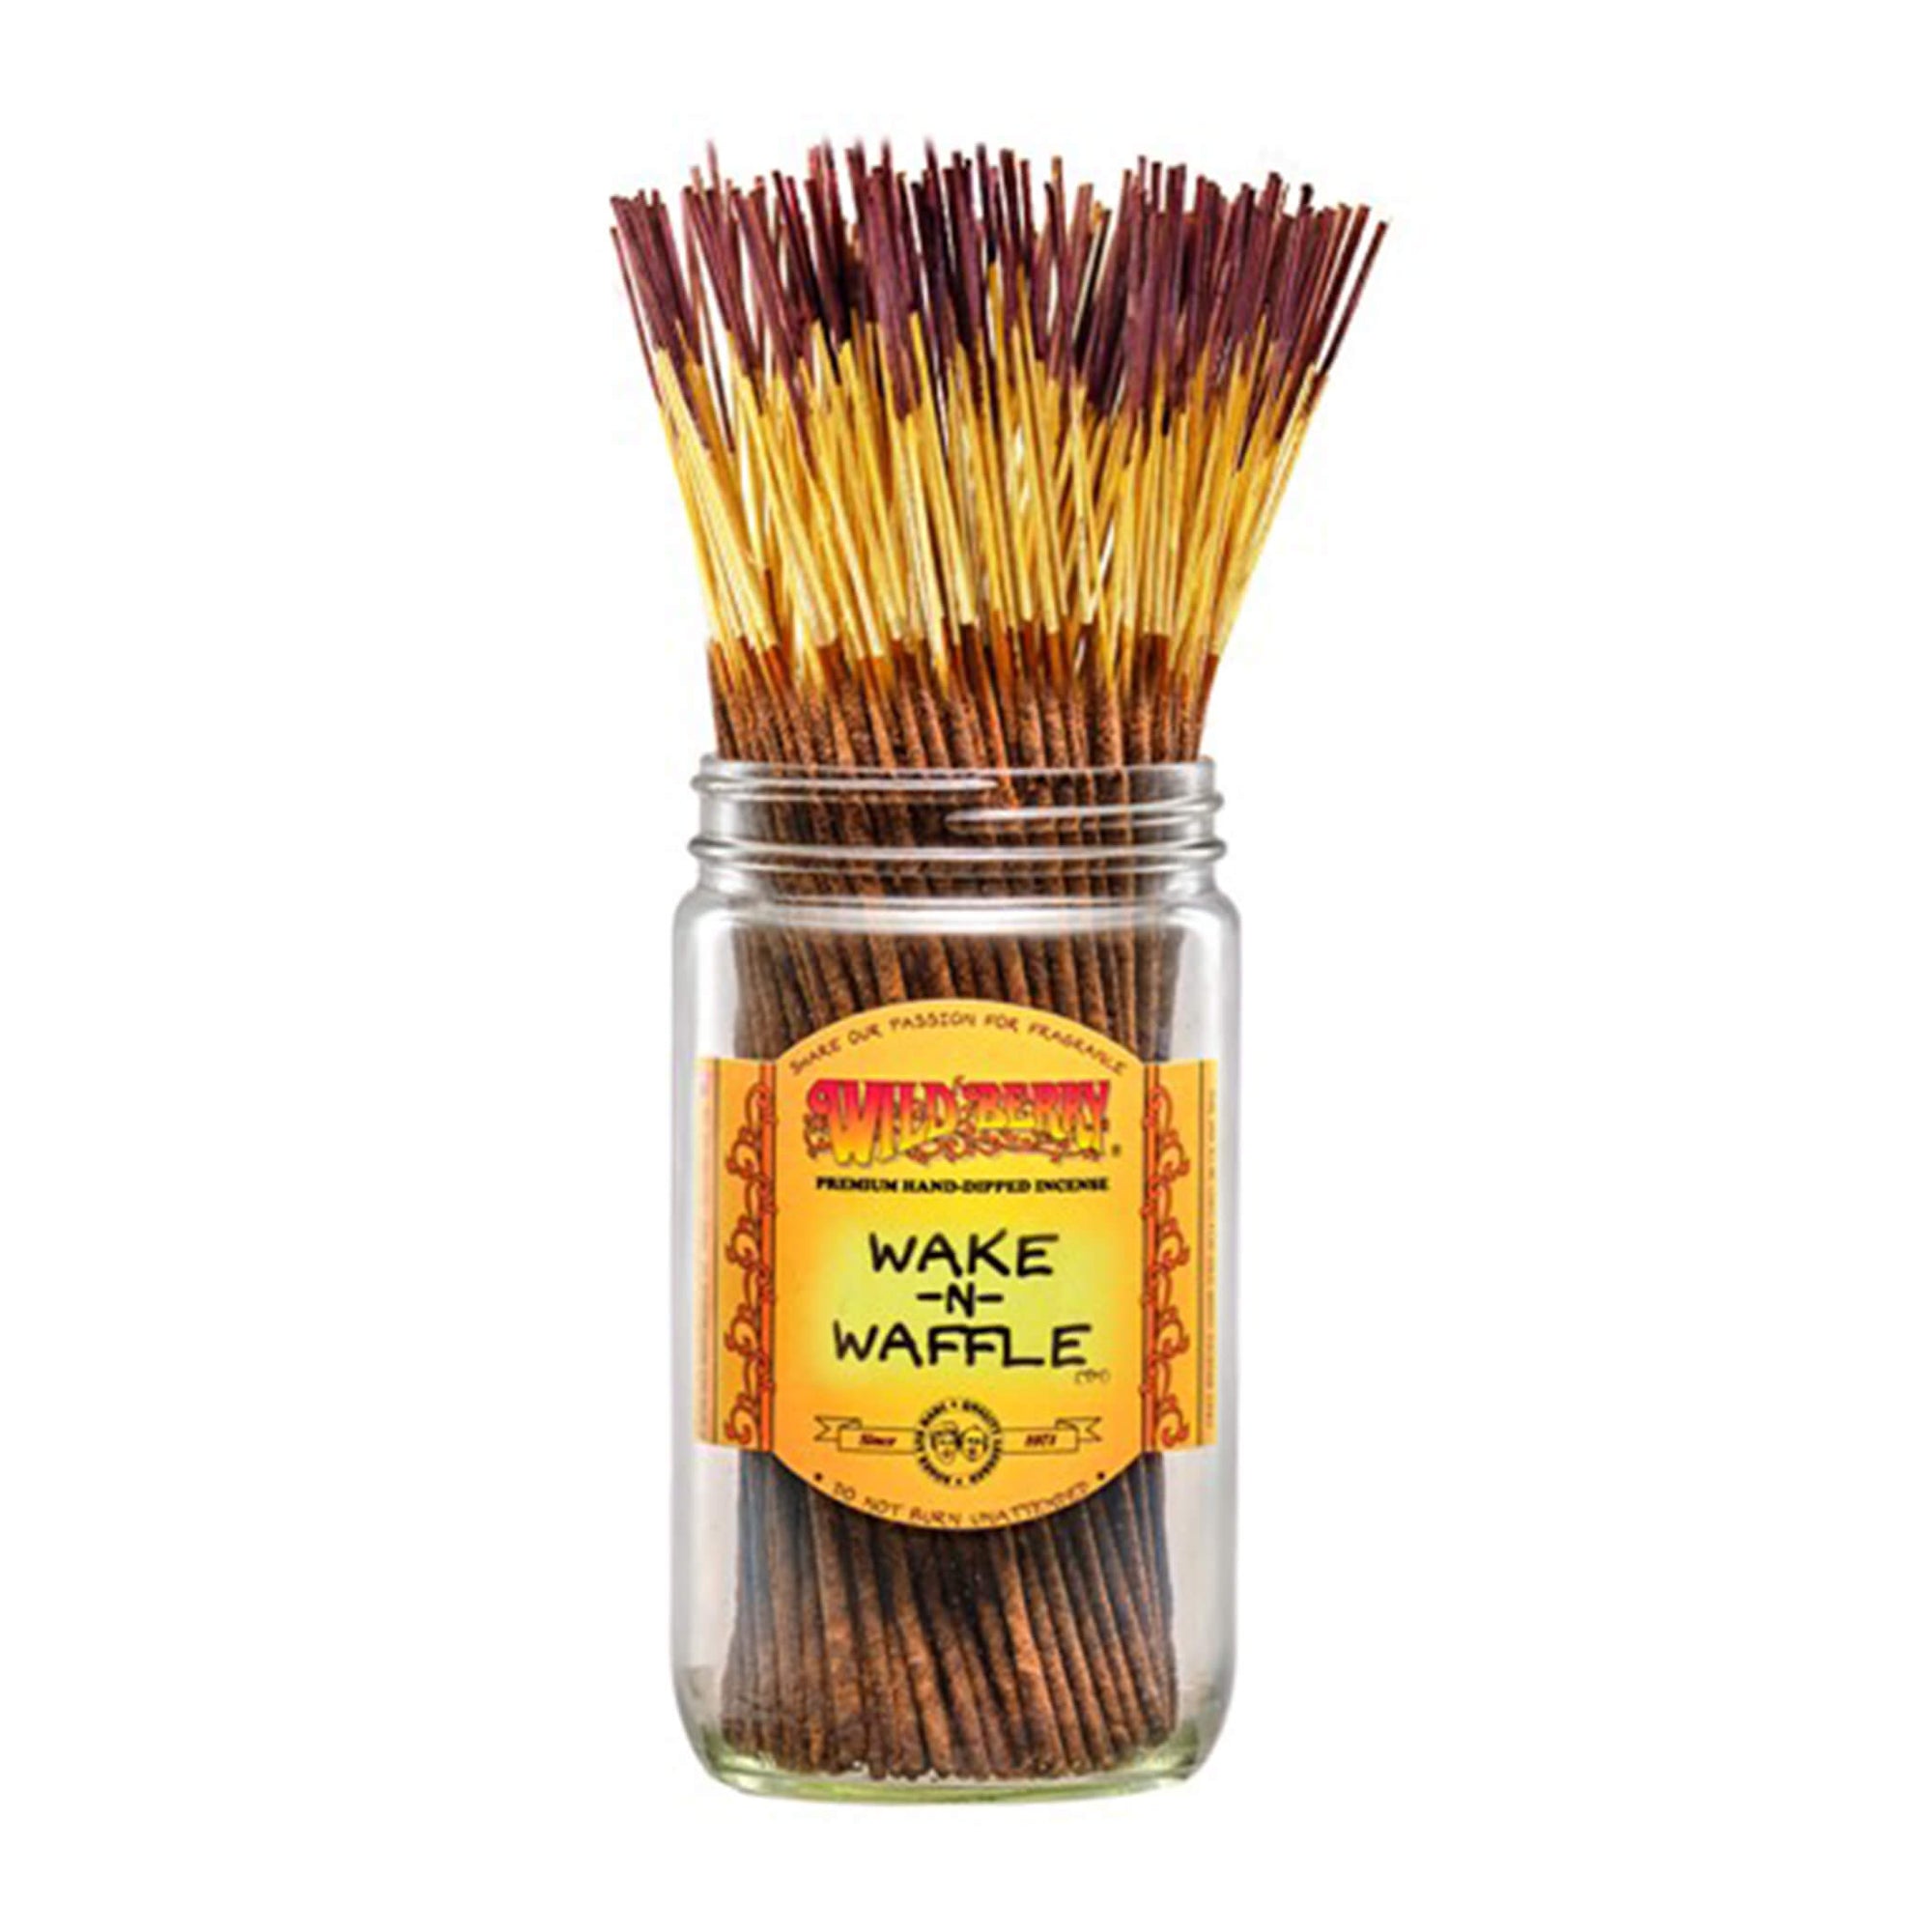 Wake -N- Waffle ™ Incense Sticks | Profile View In Jar | the dabbing specialists